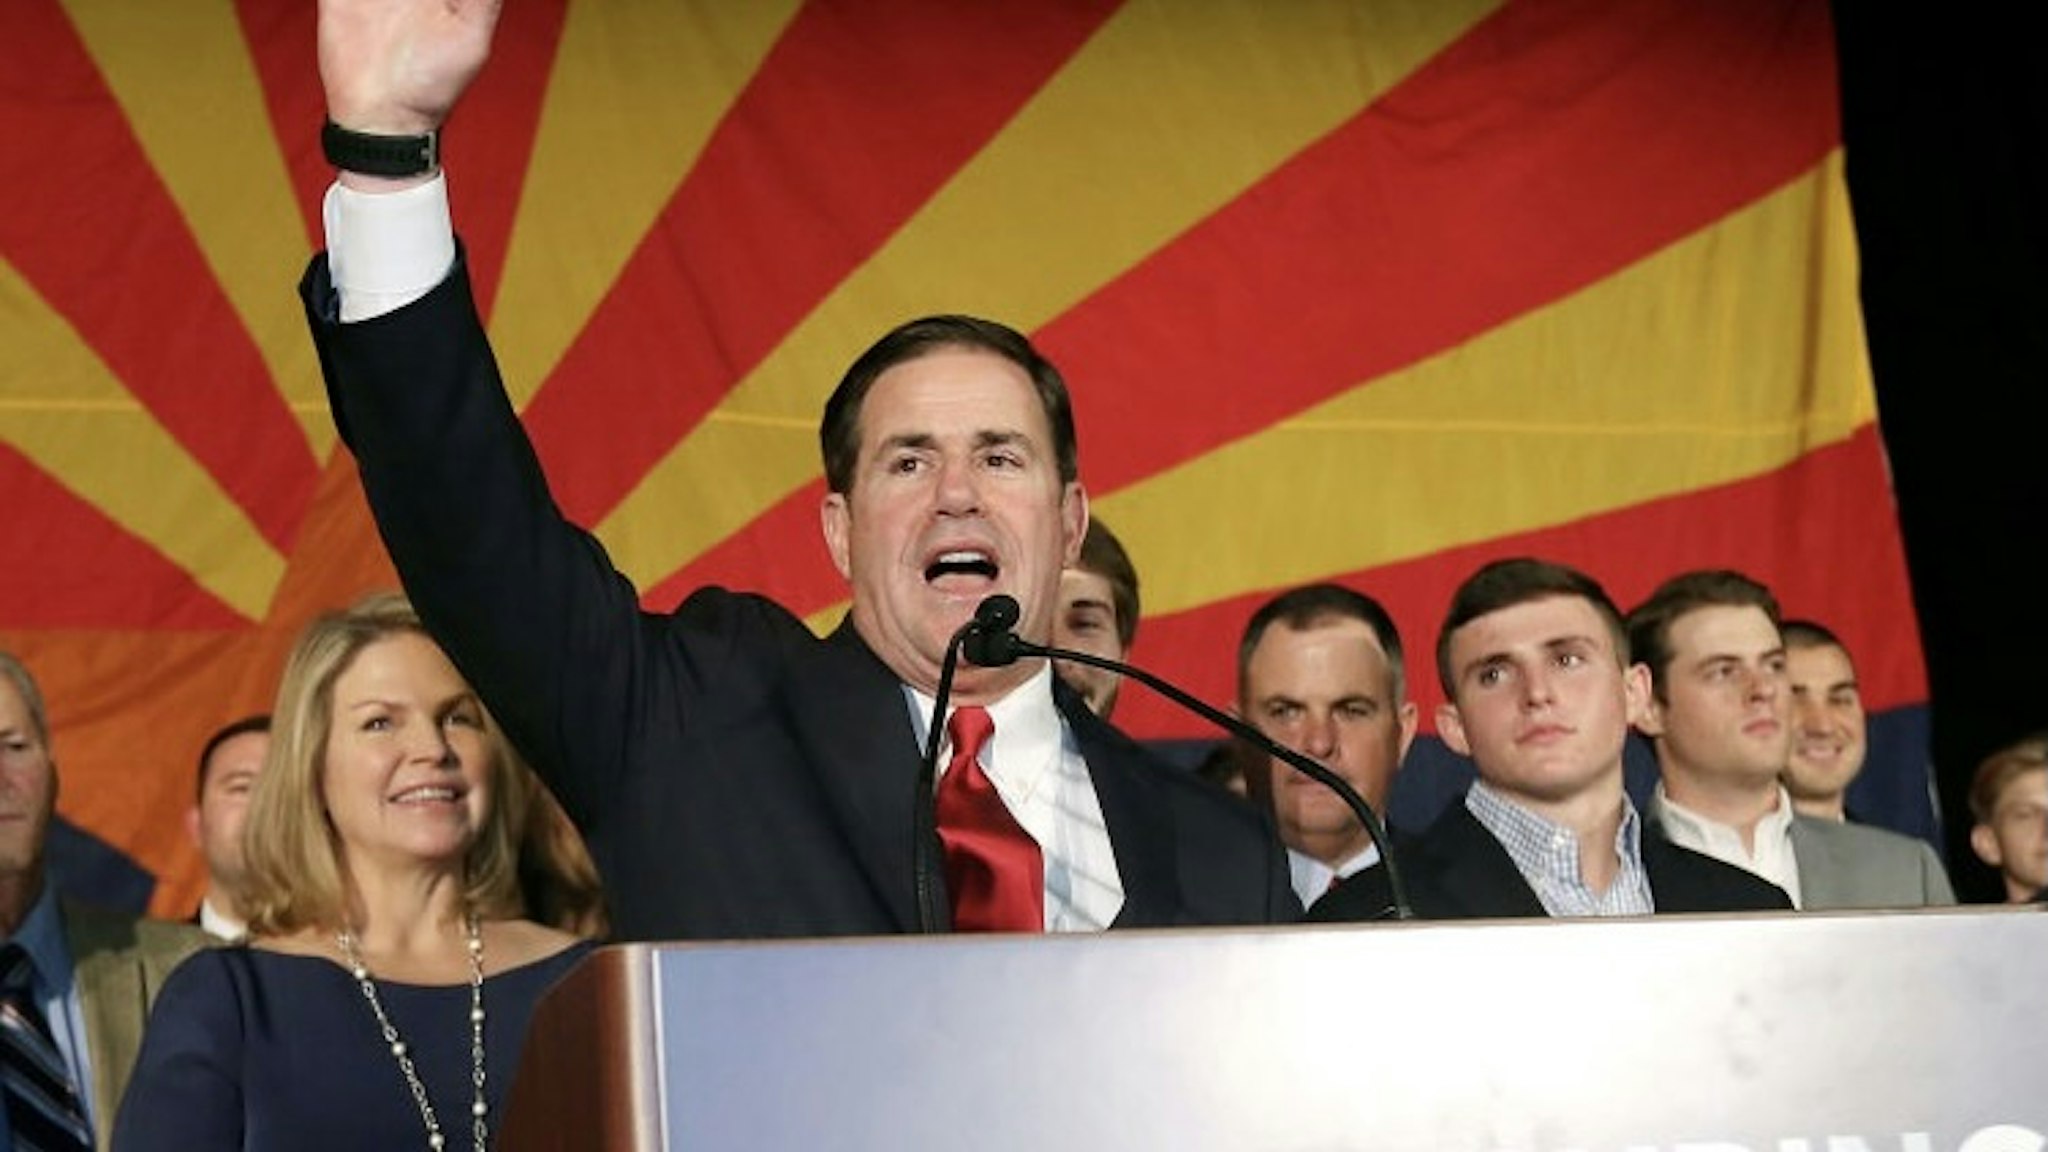 Arizona GOP Candidates Attend Election Night Event In Scottsdale SCOTTSDALE, AZ - NOVEMBER 06: Republican Gov. Doug Ducey celebrates his victory at an election night event for Arizona GOP candidates on November 6, 2018 in Scottsdale, Arizona. Ducey defeated Democratic challenger David Garcia. (Photo by Ralph Freso/Getty Images) Ralph Freso / Stringer via Getty Images